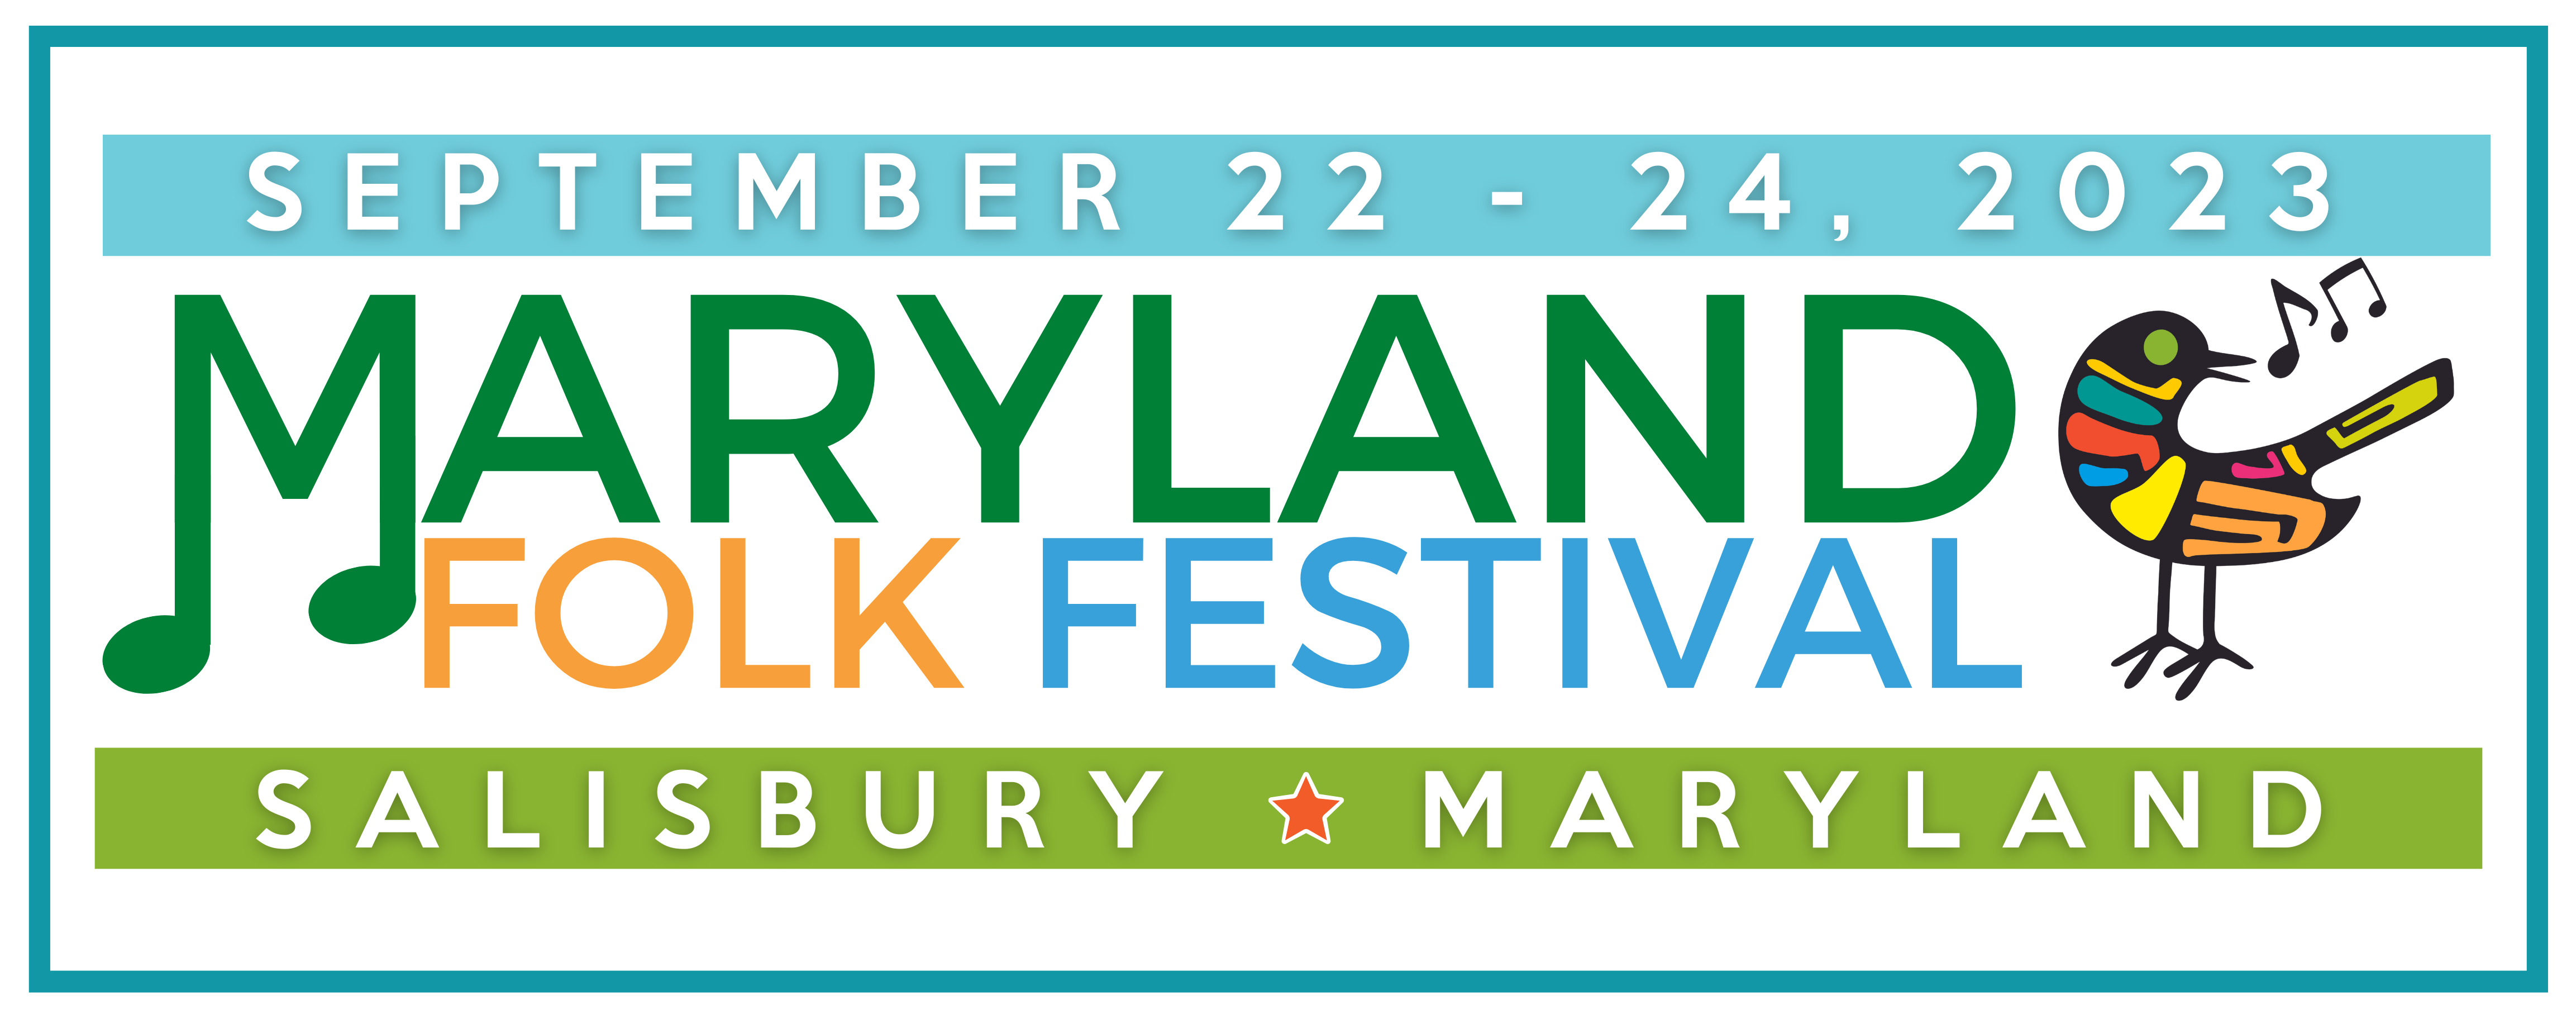 Perdue Farms named as the Presenting Sponsor of 2023 Maryland Folk